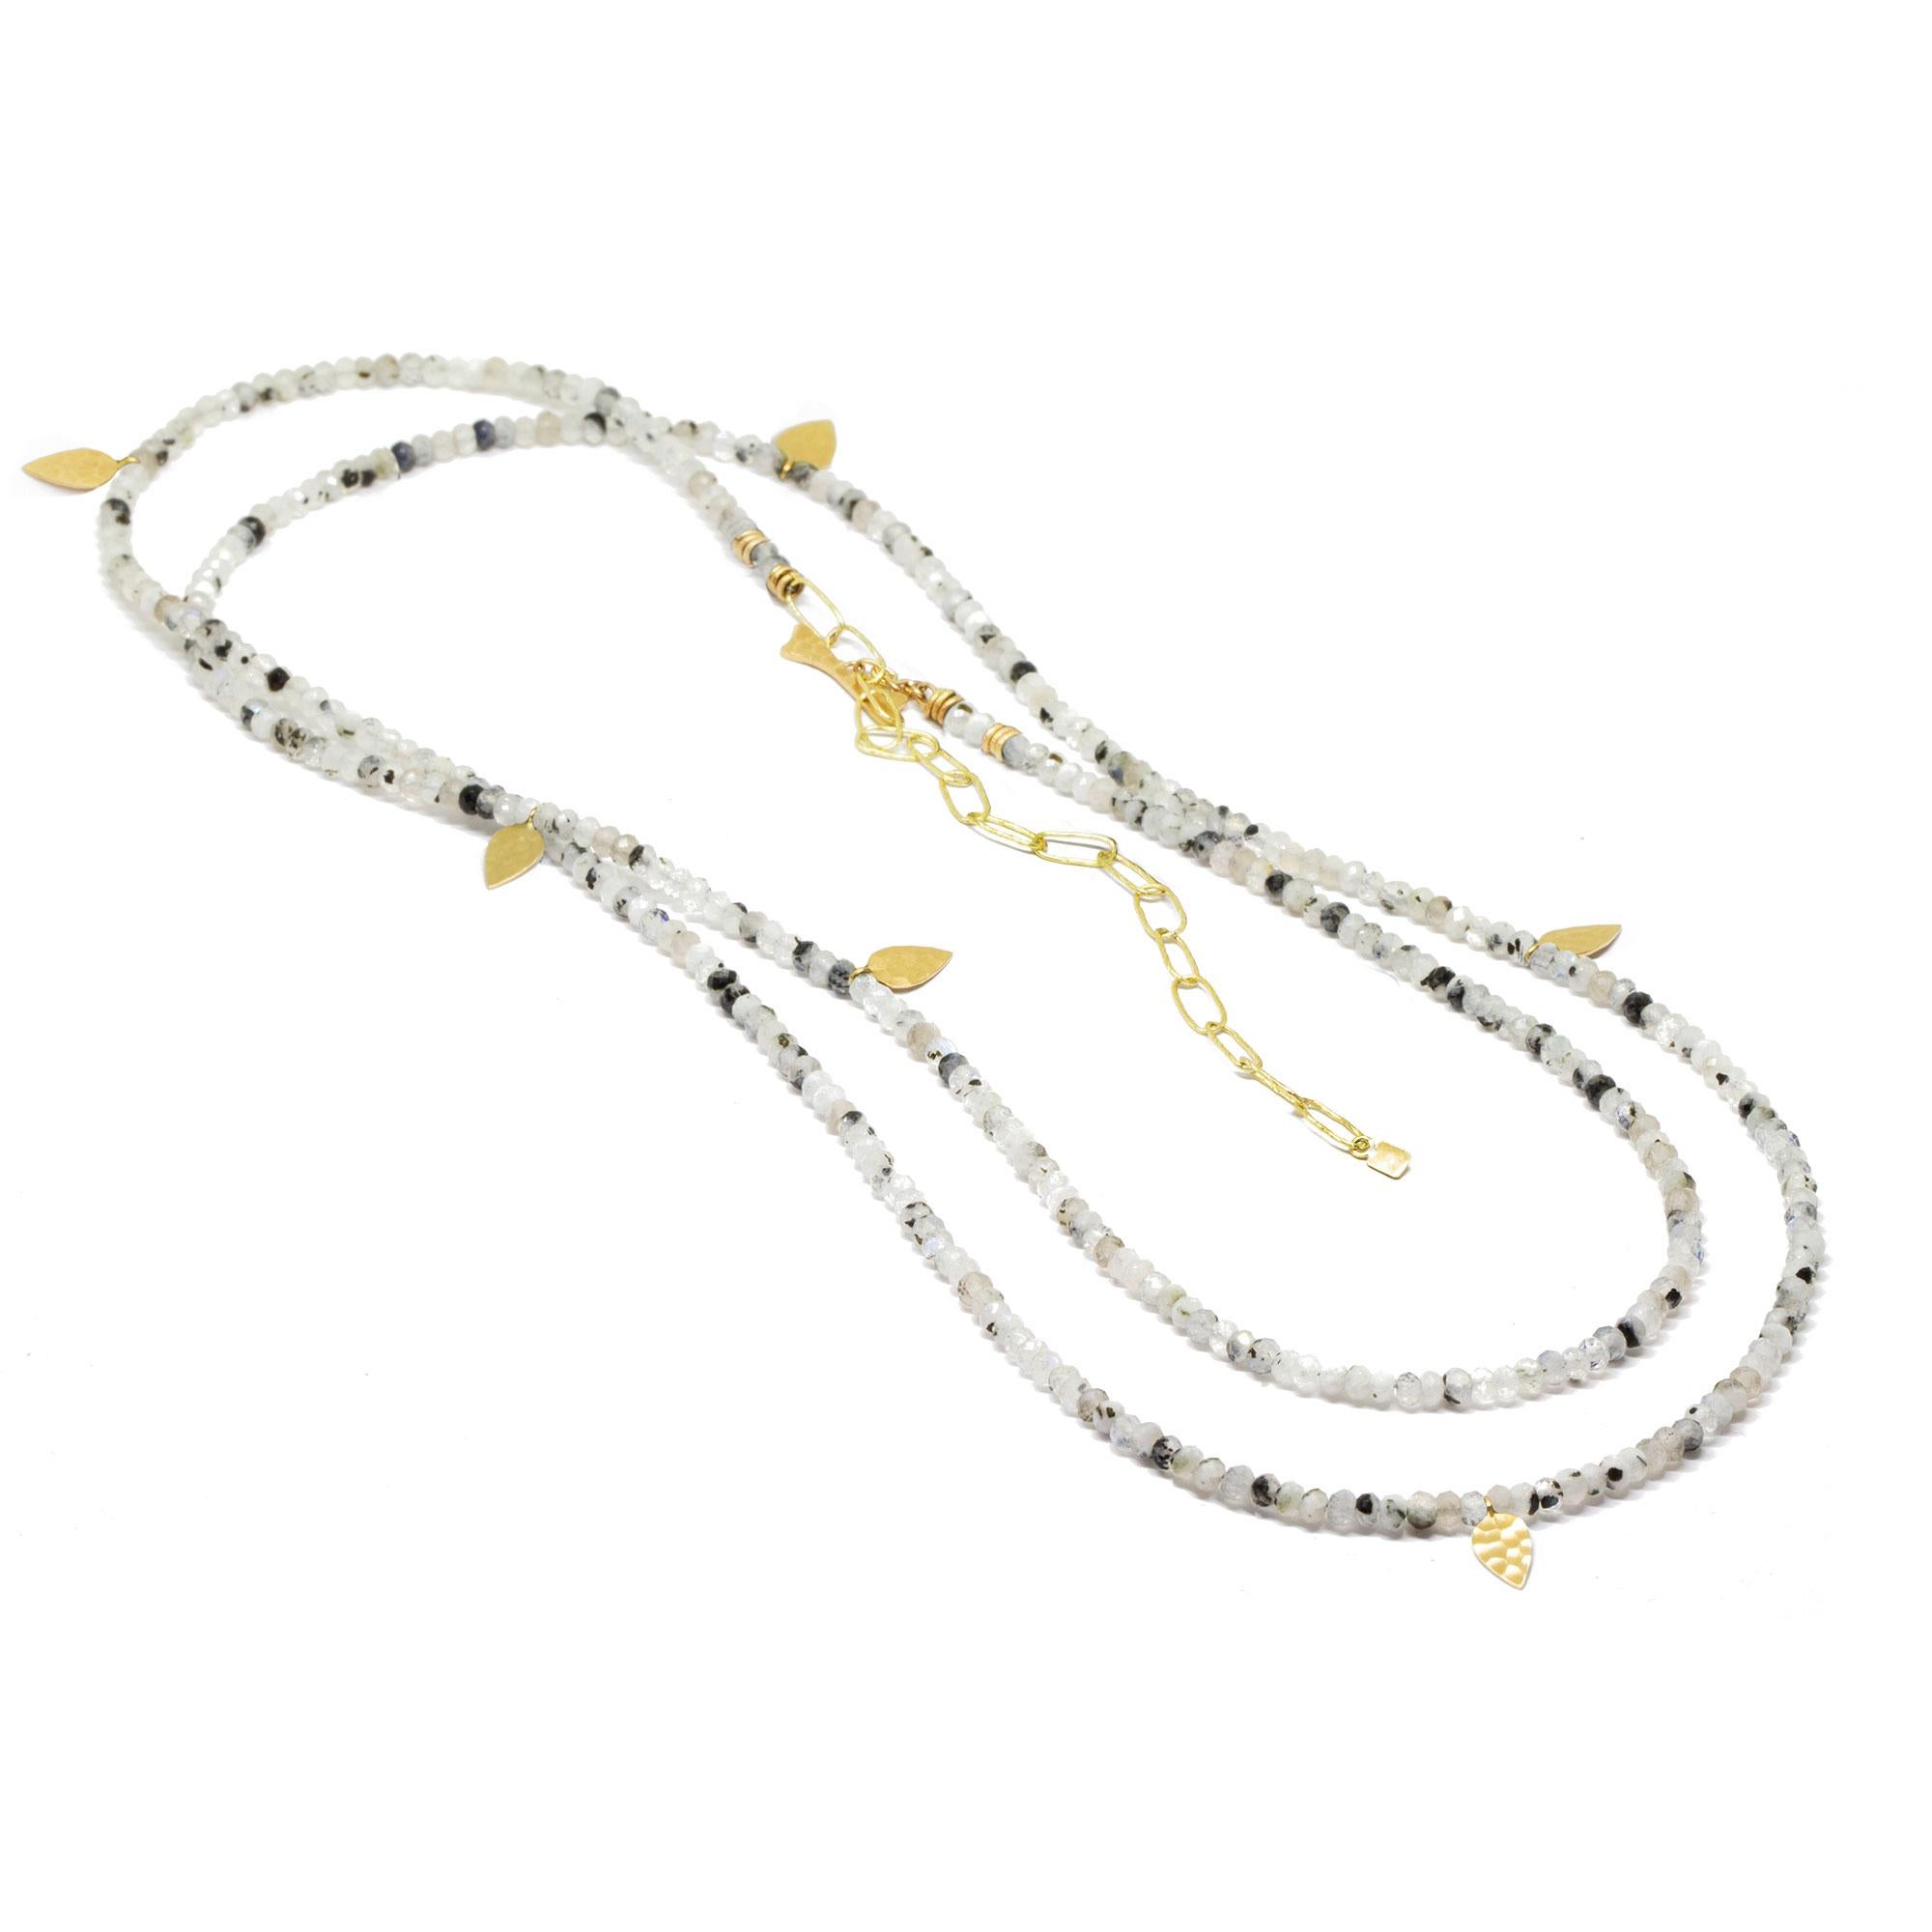 The best part about our Heritage Moonstone Necklette isn’t just that it can be worn long, doubled-up, or as a wrap bracelet (although that’s pretty cool). It’s that you can thread any of our Charms onto the Moonstone beads—have fun playing with all